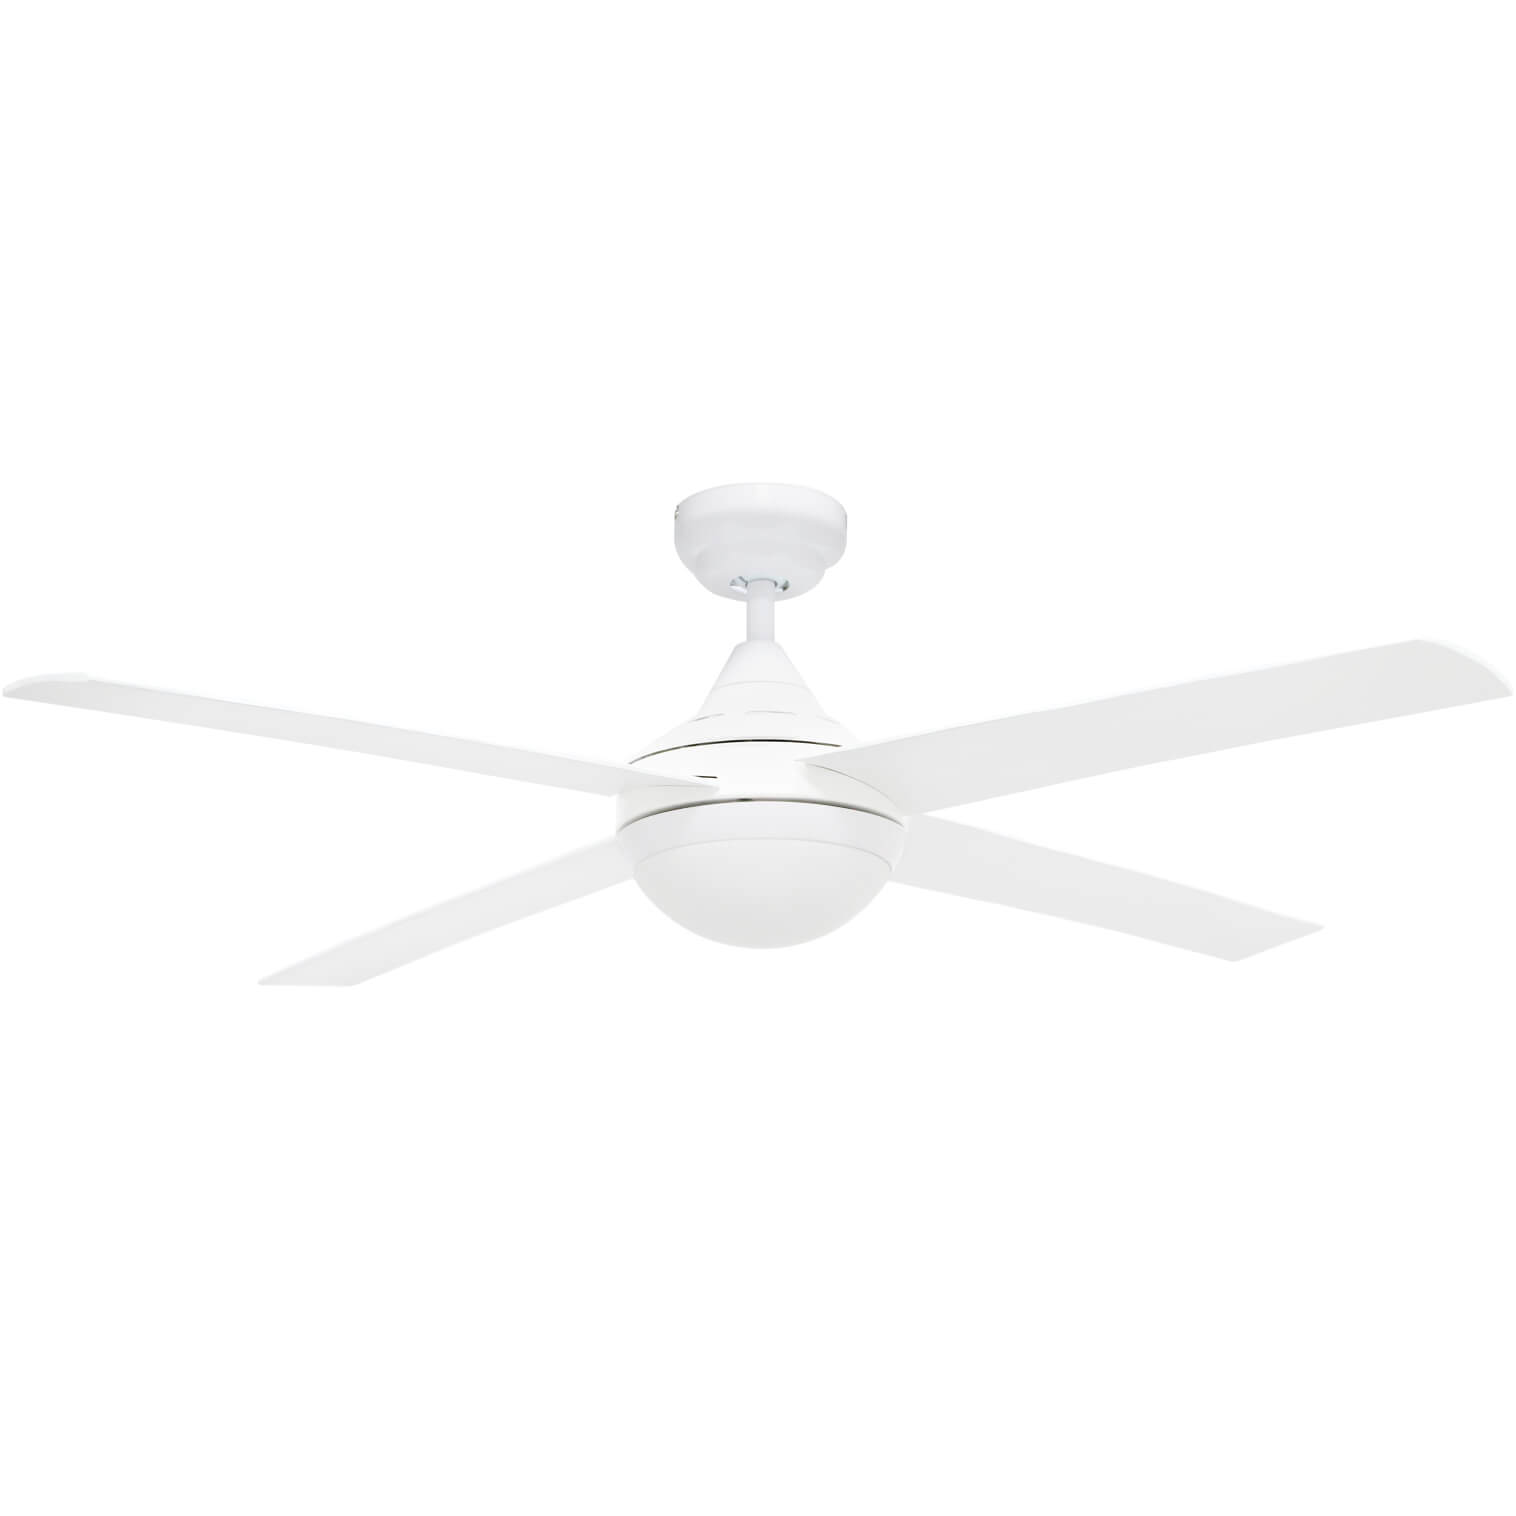 Bulimba Outdoor Ceiling Fan With E27 Light White 48 Universal